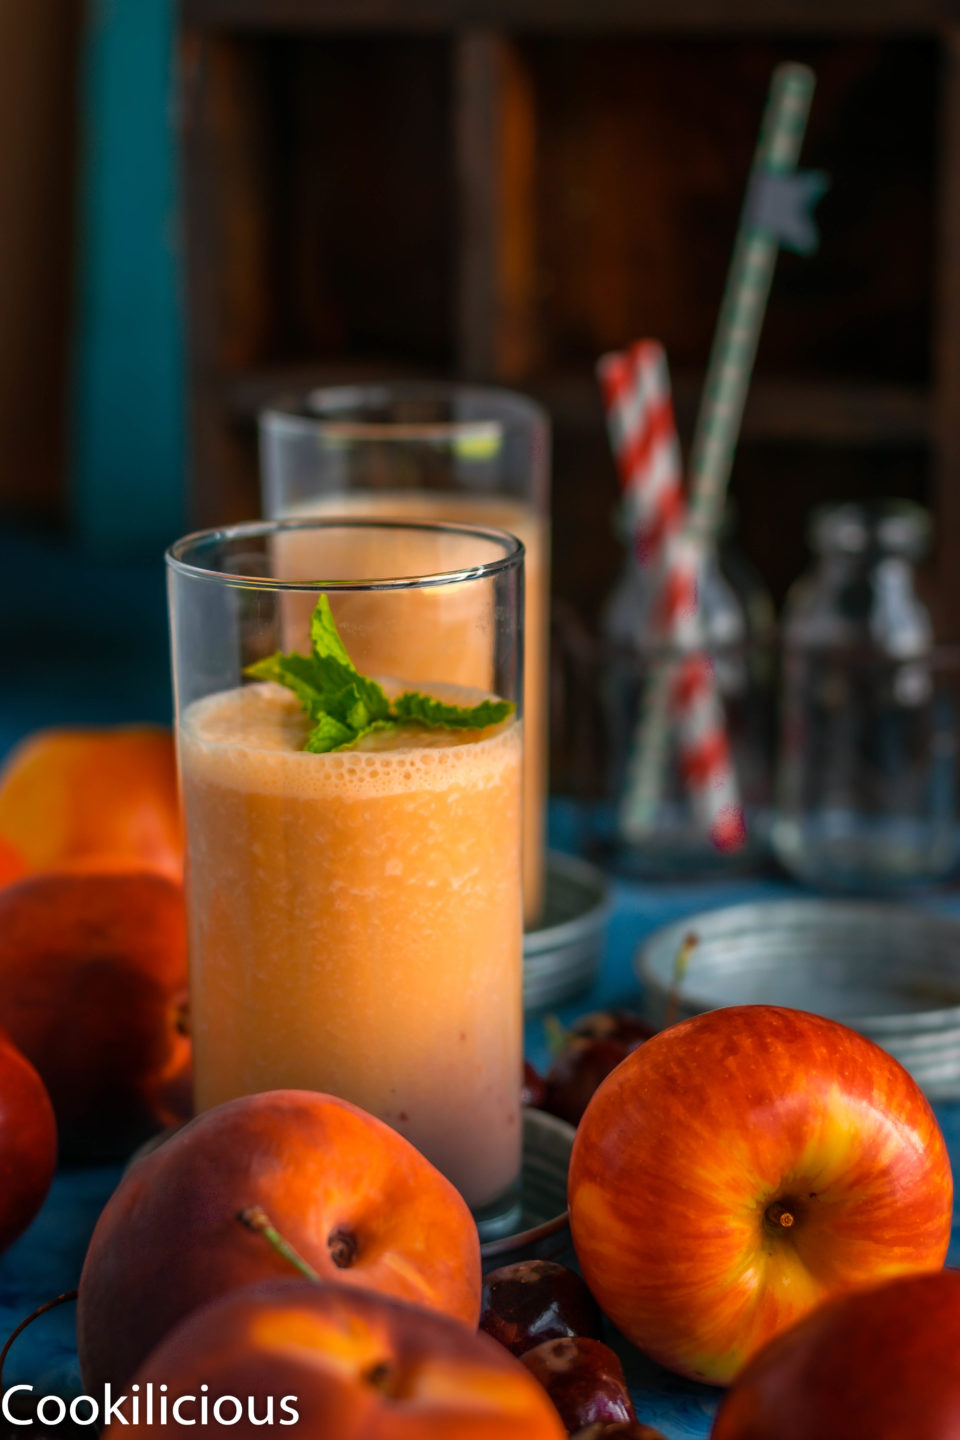 Peach & Raspberry Creamsicle Vegan Smoothie with apples and peaches in the front